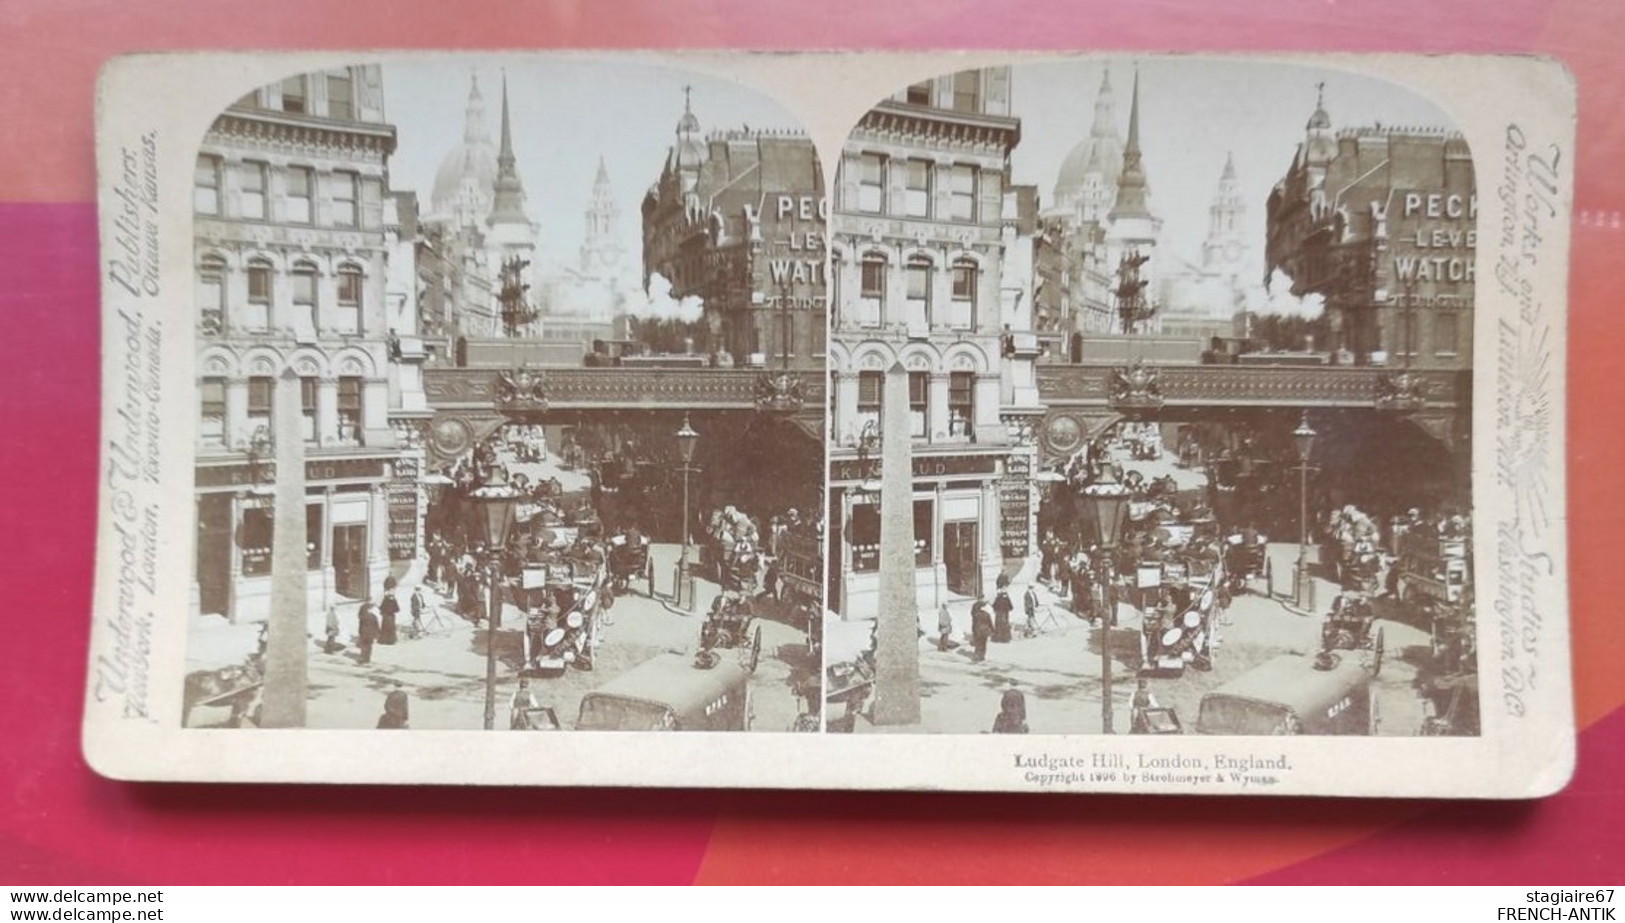 LUDGATE HILL COLLINE LONDRES ANGLETERRE - Stereoskope - Stereobetrachter